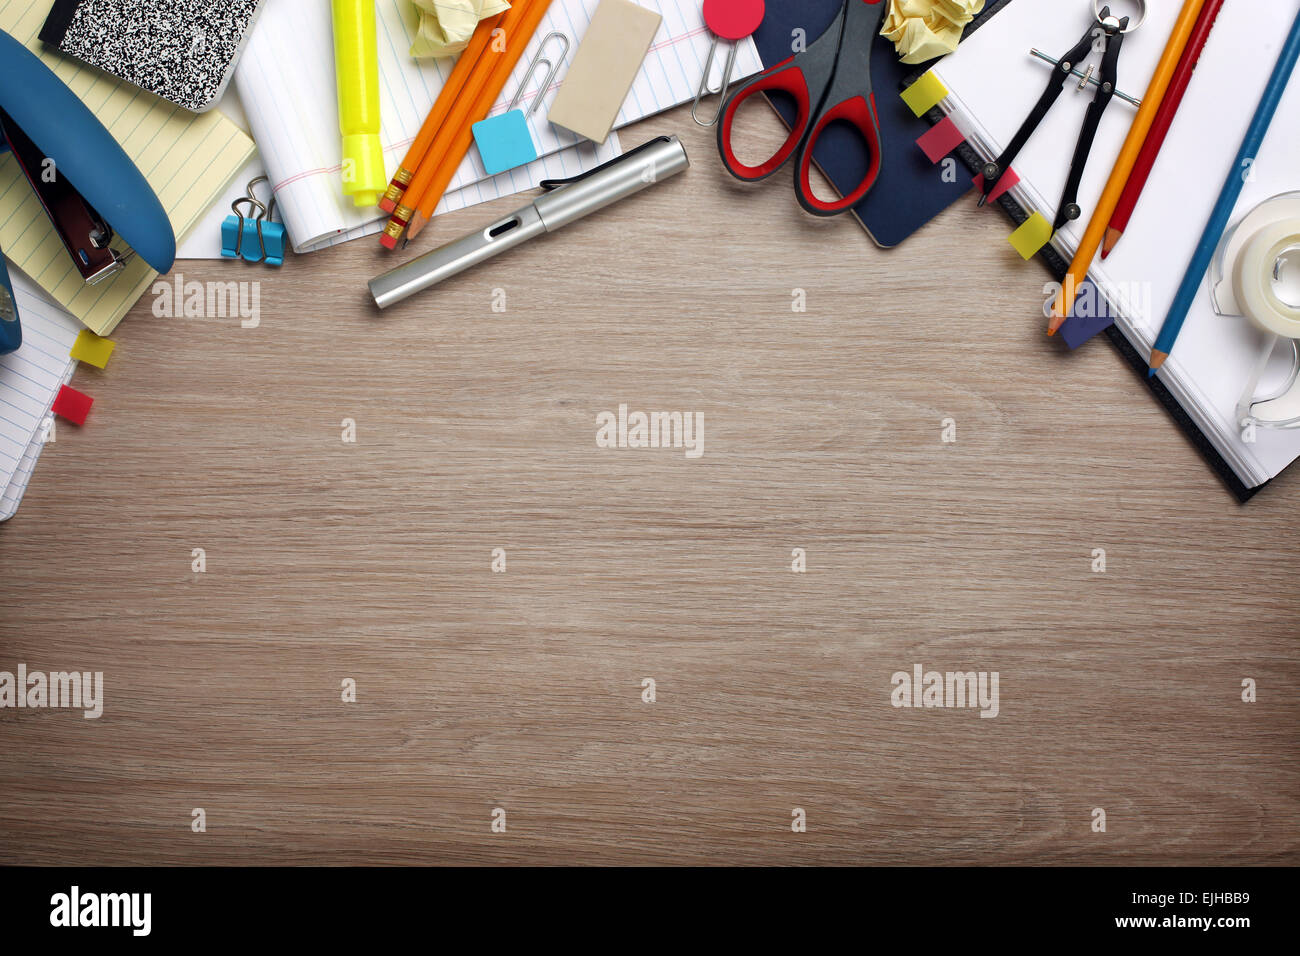 Desk cluttered with office supplies Stock Photo